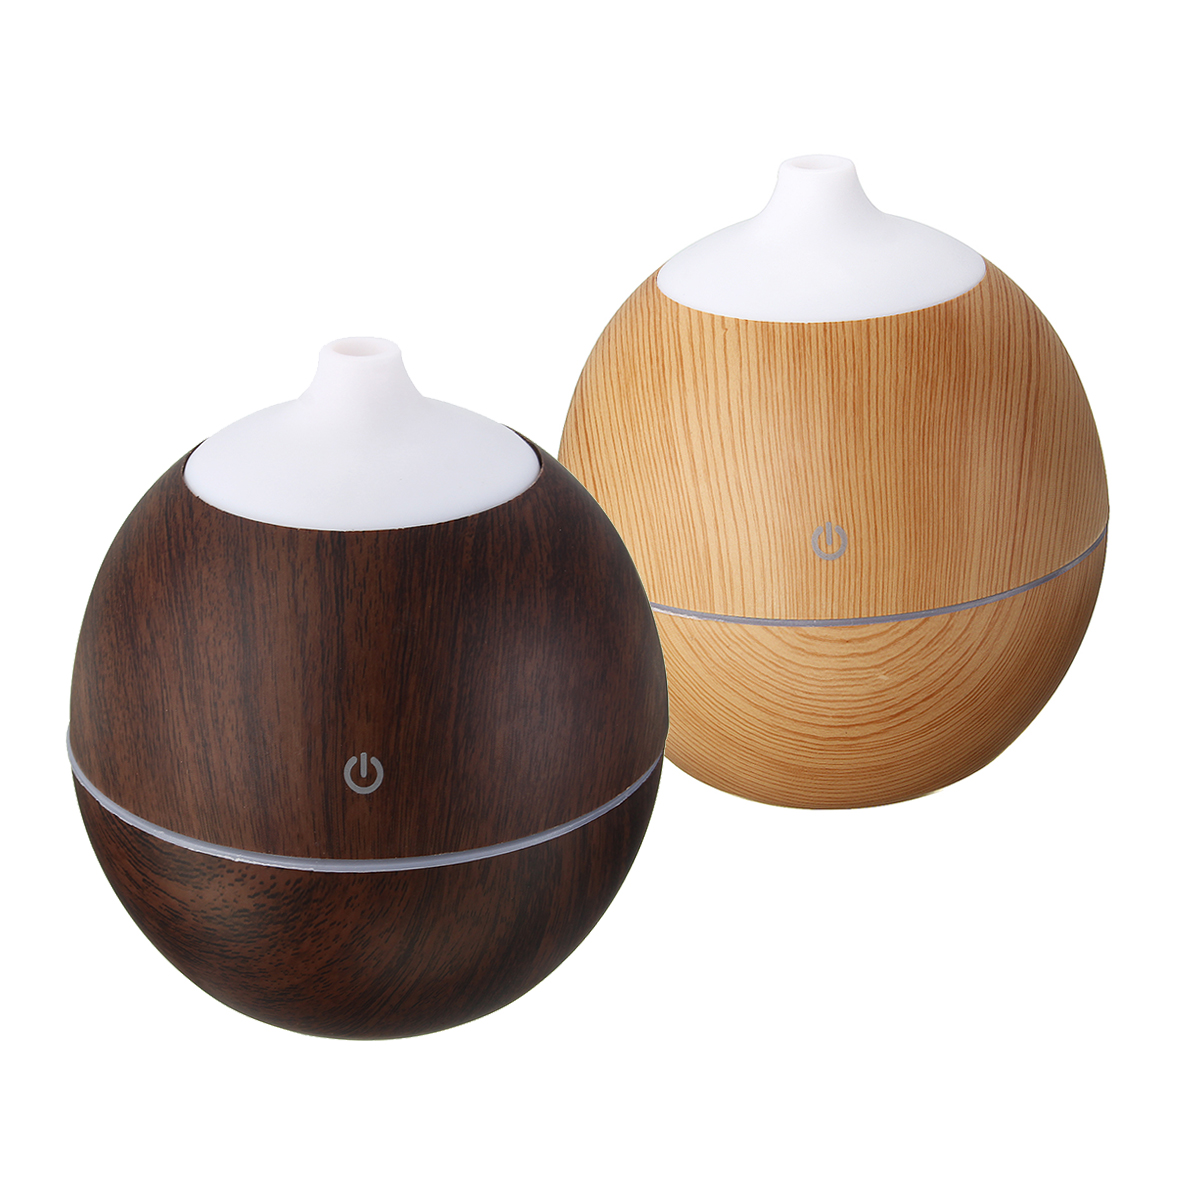 

5V USB Intelligent LED Ultrasonic Aroma Essential Oil Humidifier Air Aromatherapy Diffuser Purifier